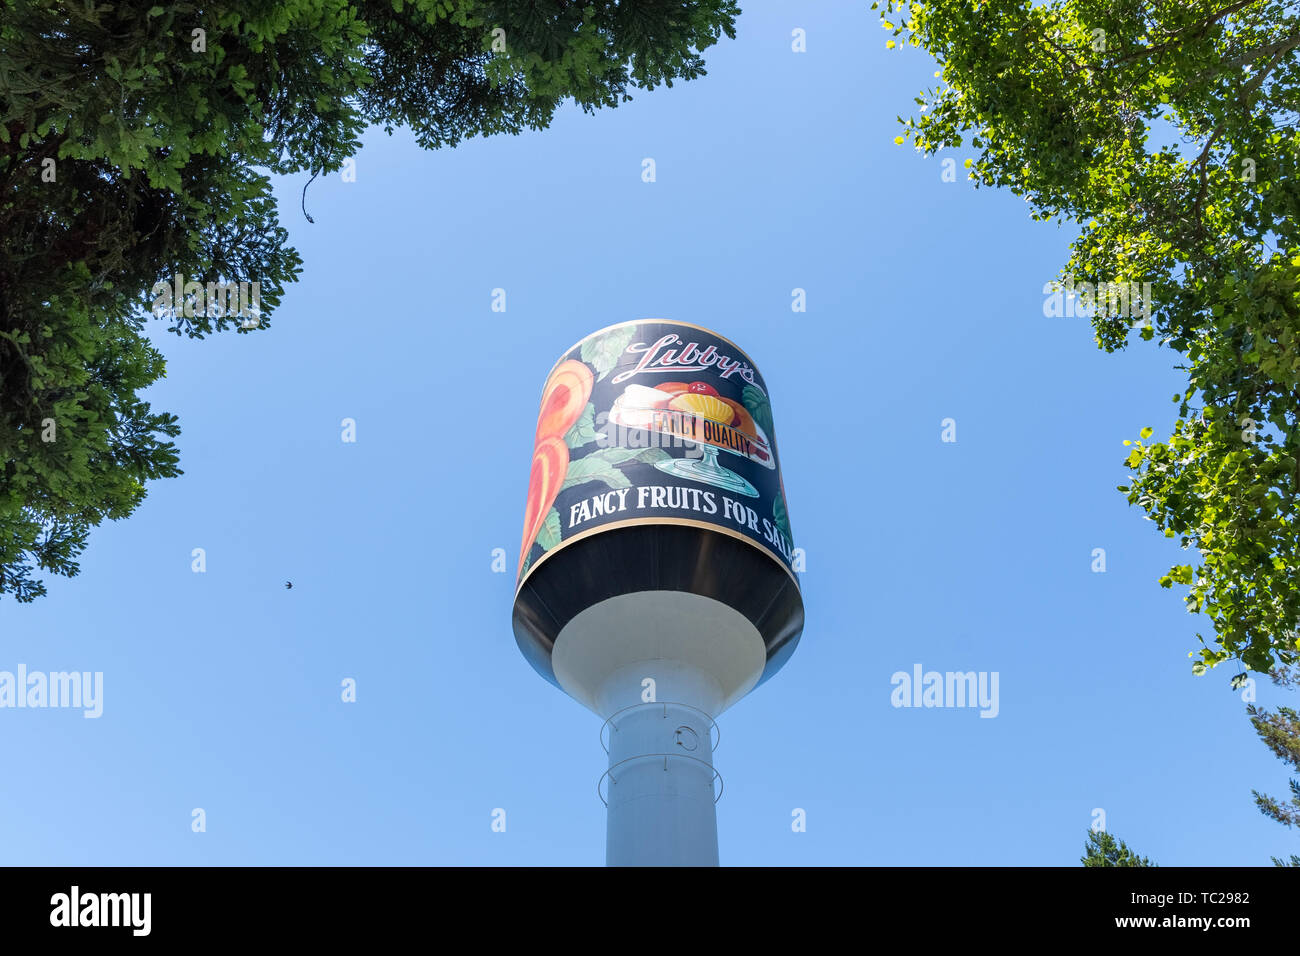 june-1-2019-sunnyvale-ca-usa-libby-s-water-tower-the-only-thing